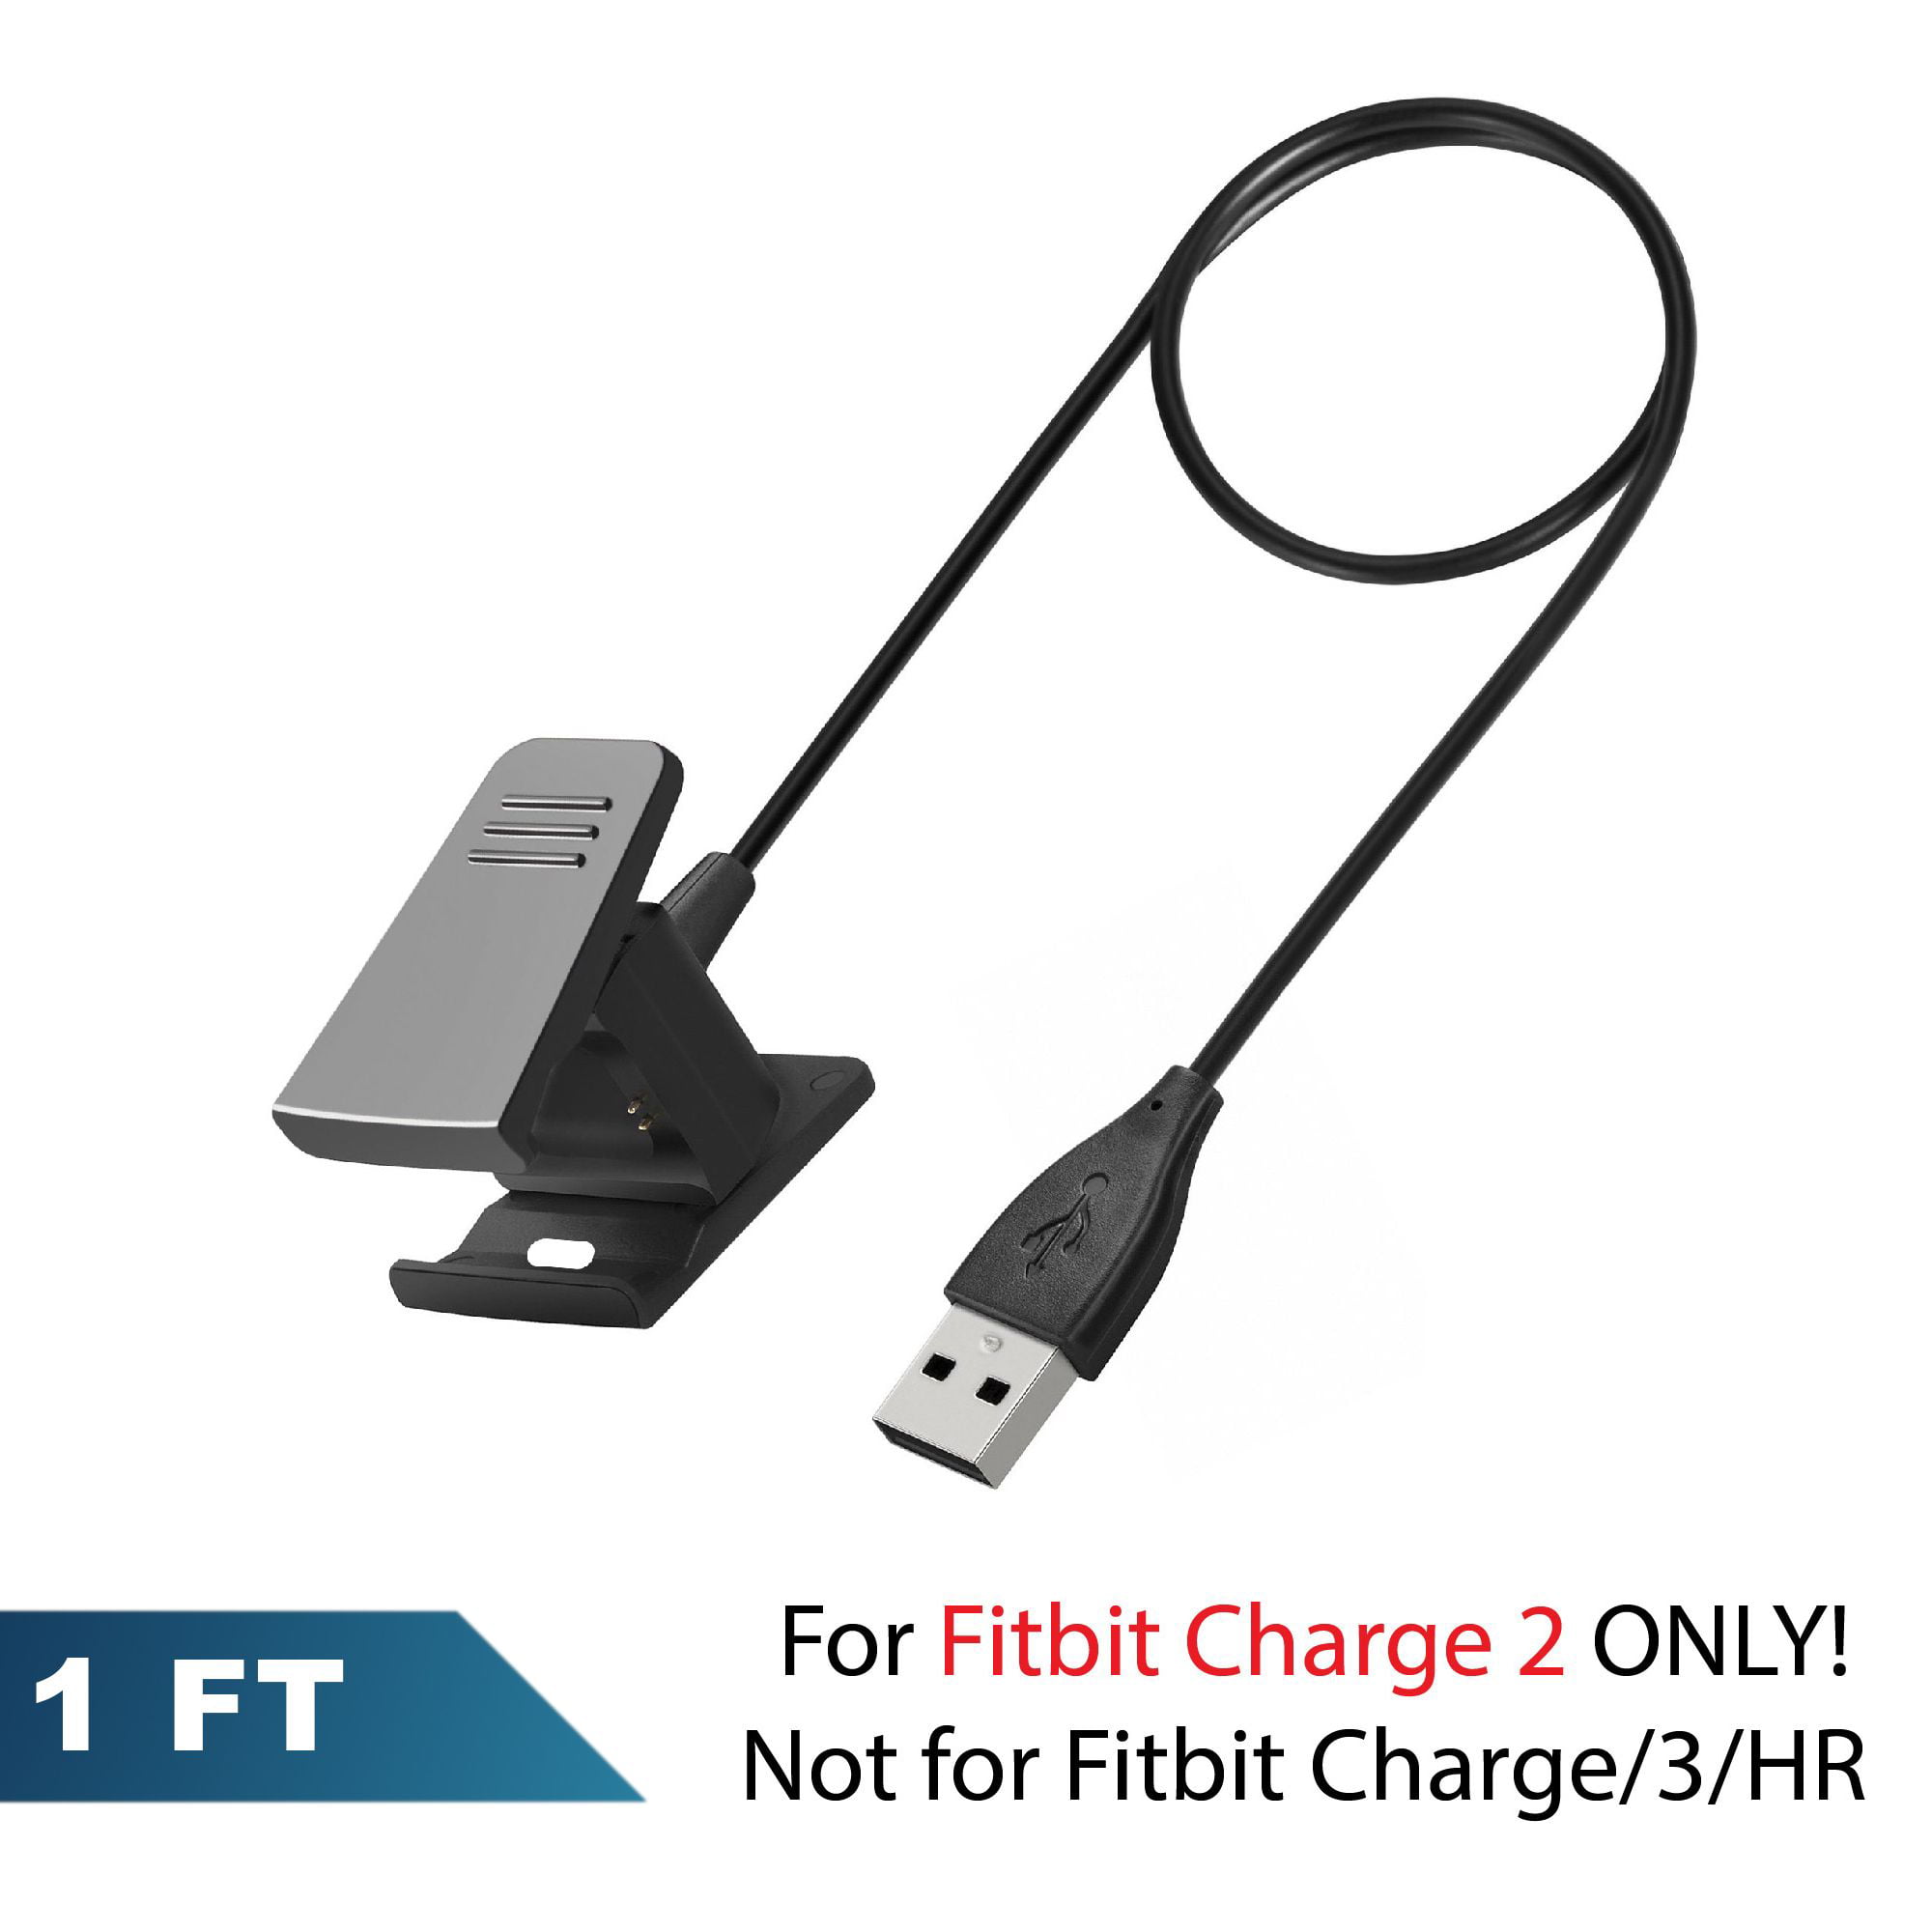 USB Charger Cable Cord Charging For Fitbit Flex 2 Tracker Wristband 